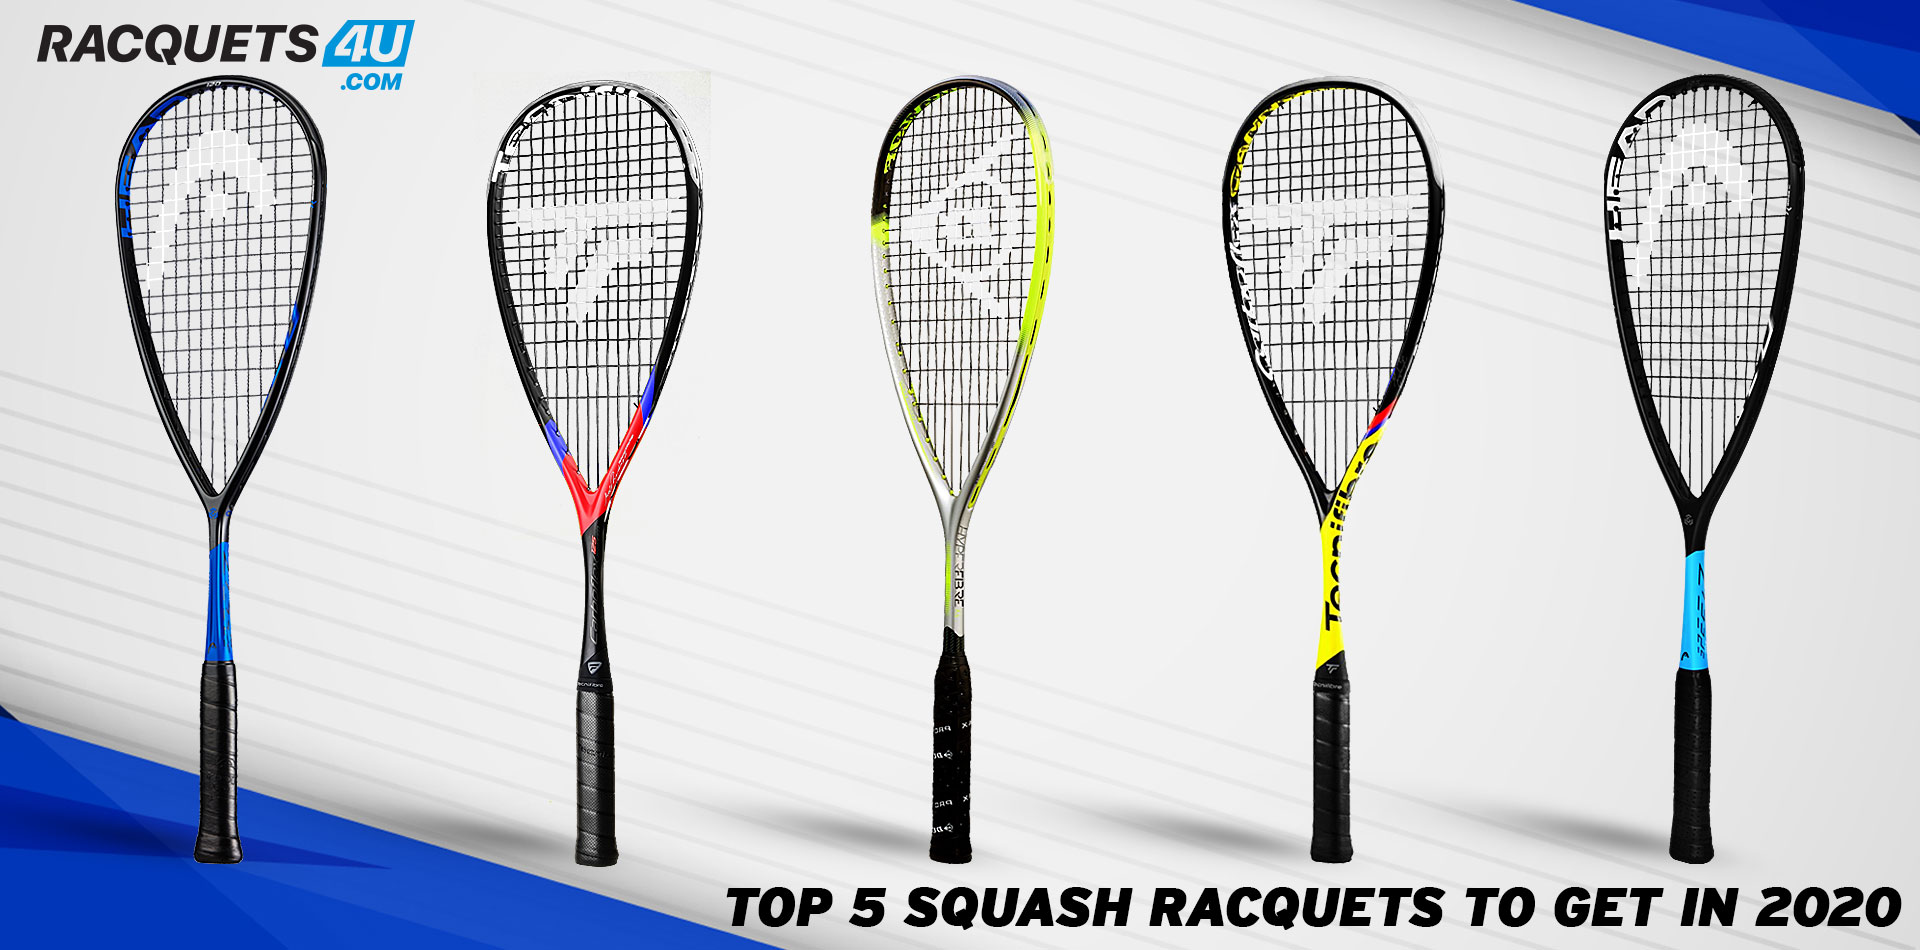 gyde hed for mig Top 5 Squash Racquets to get in 2020